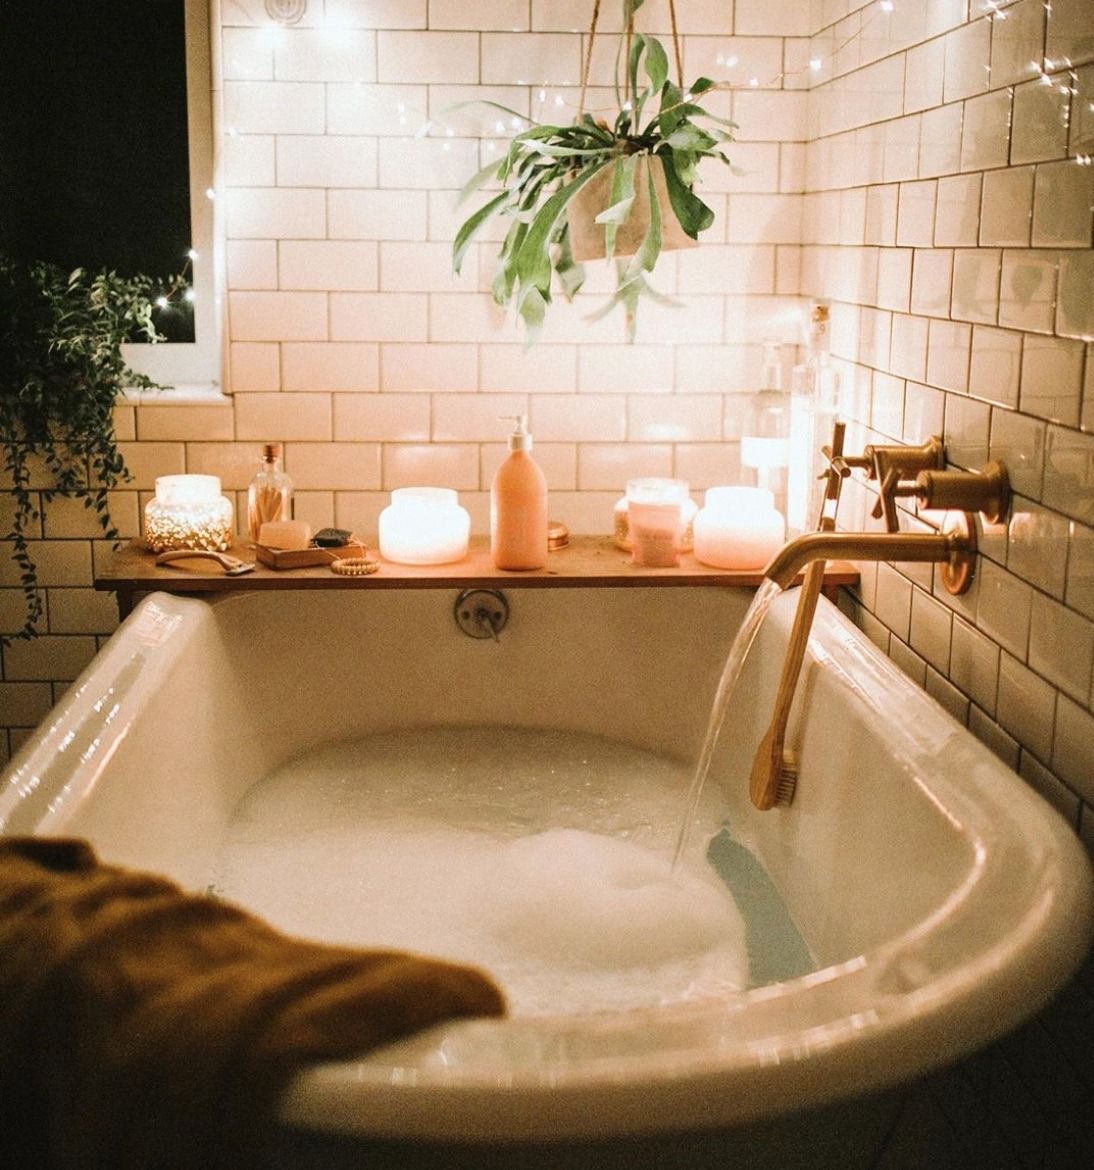 Romantic Lighting for a Relaxing Moment in a Bathtub